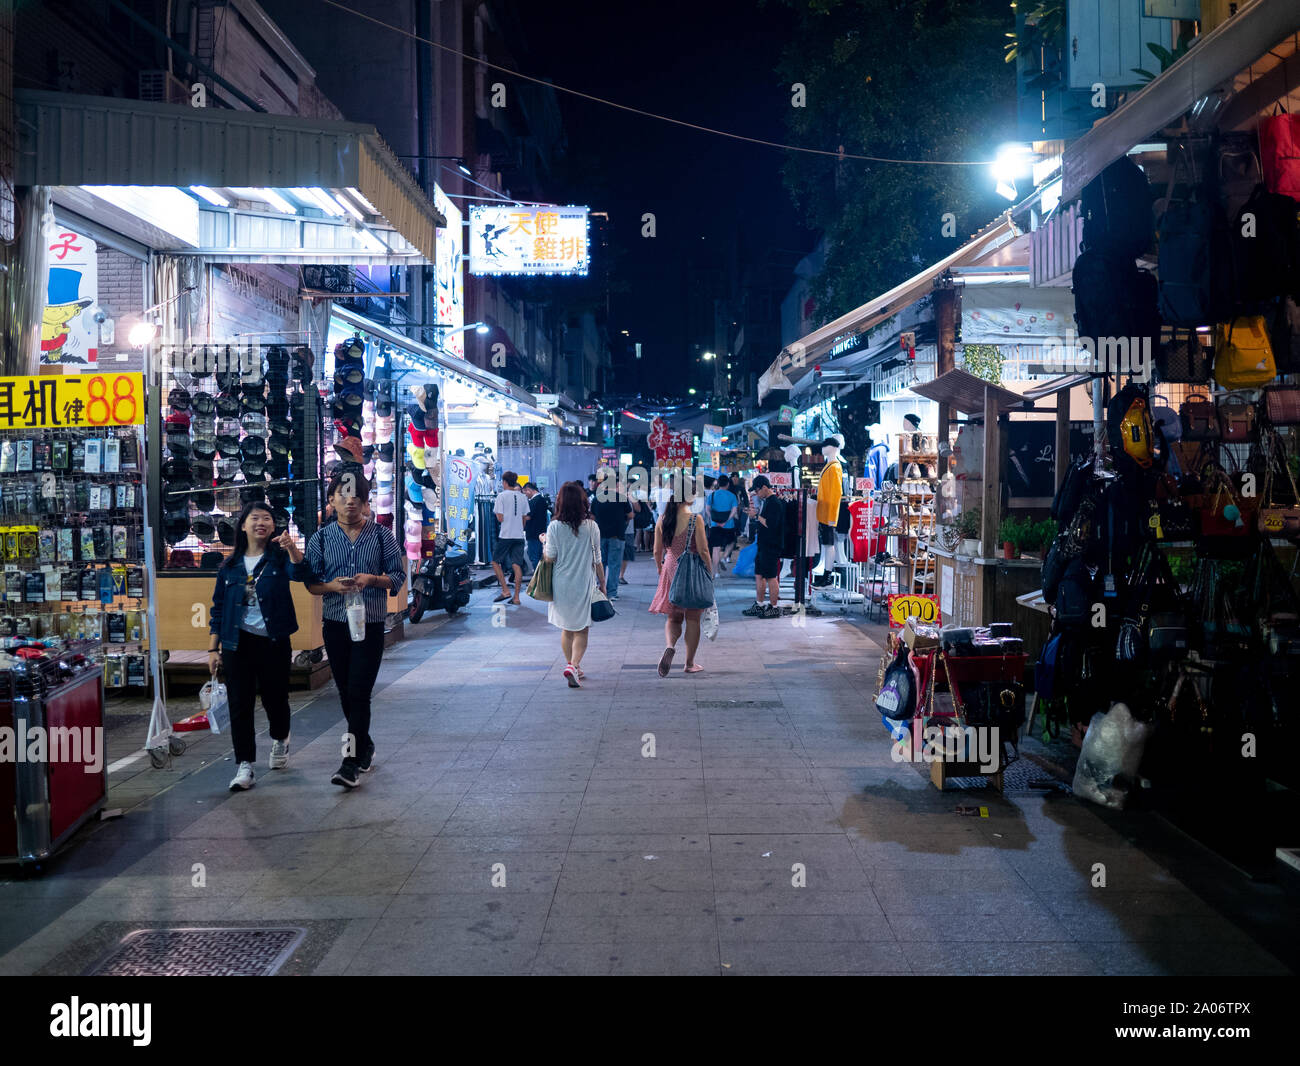 Kaohsiung, Taiwan: Pedestrian Area at Shinkuchan Shopping District 新堀江商圈. Small shops and stores along the street market at night Stock Photo